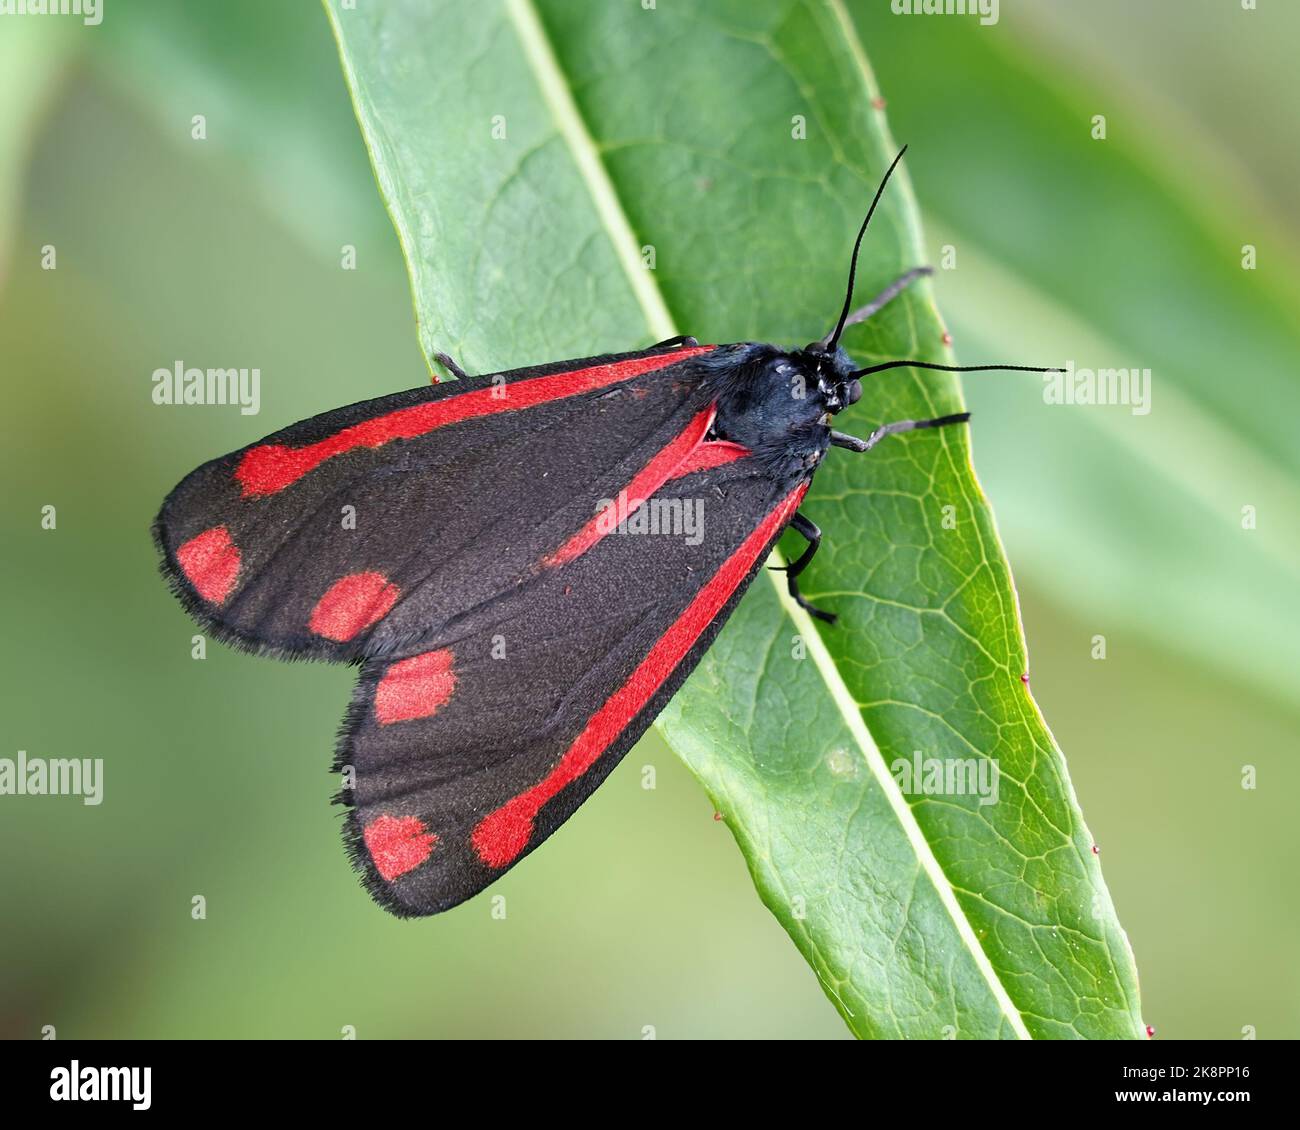 Cinnabar moth (Tyria jacobaeae) perched on plant leaf. Tipperary, Ireland Stock Photo